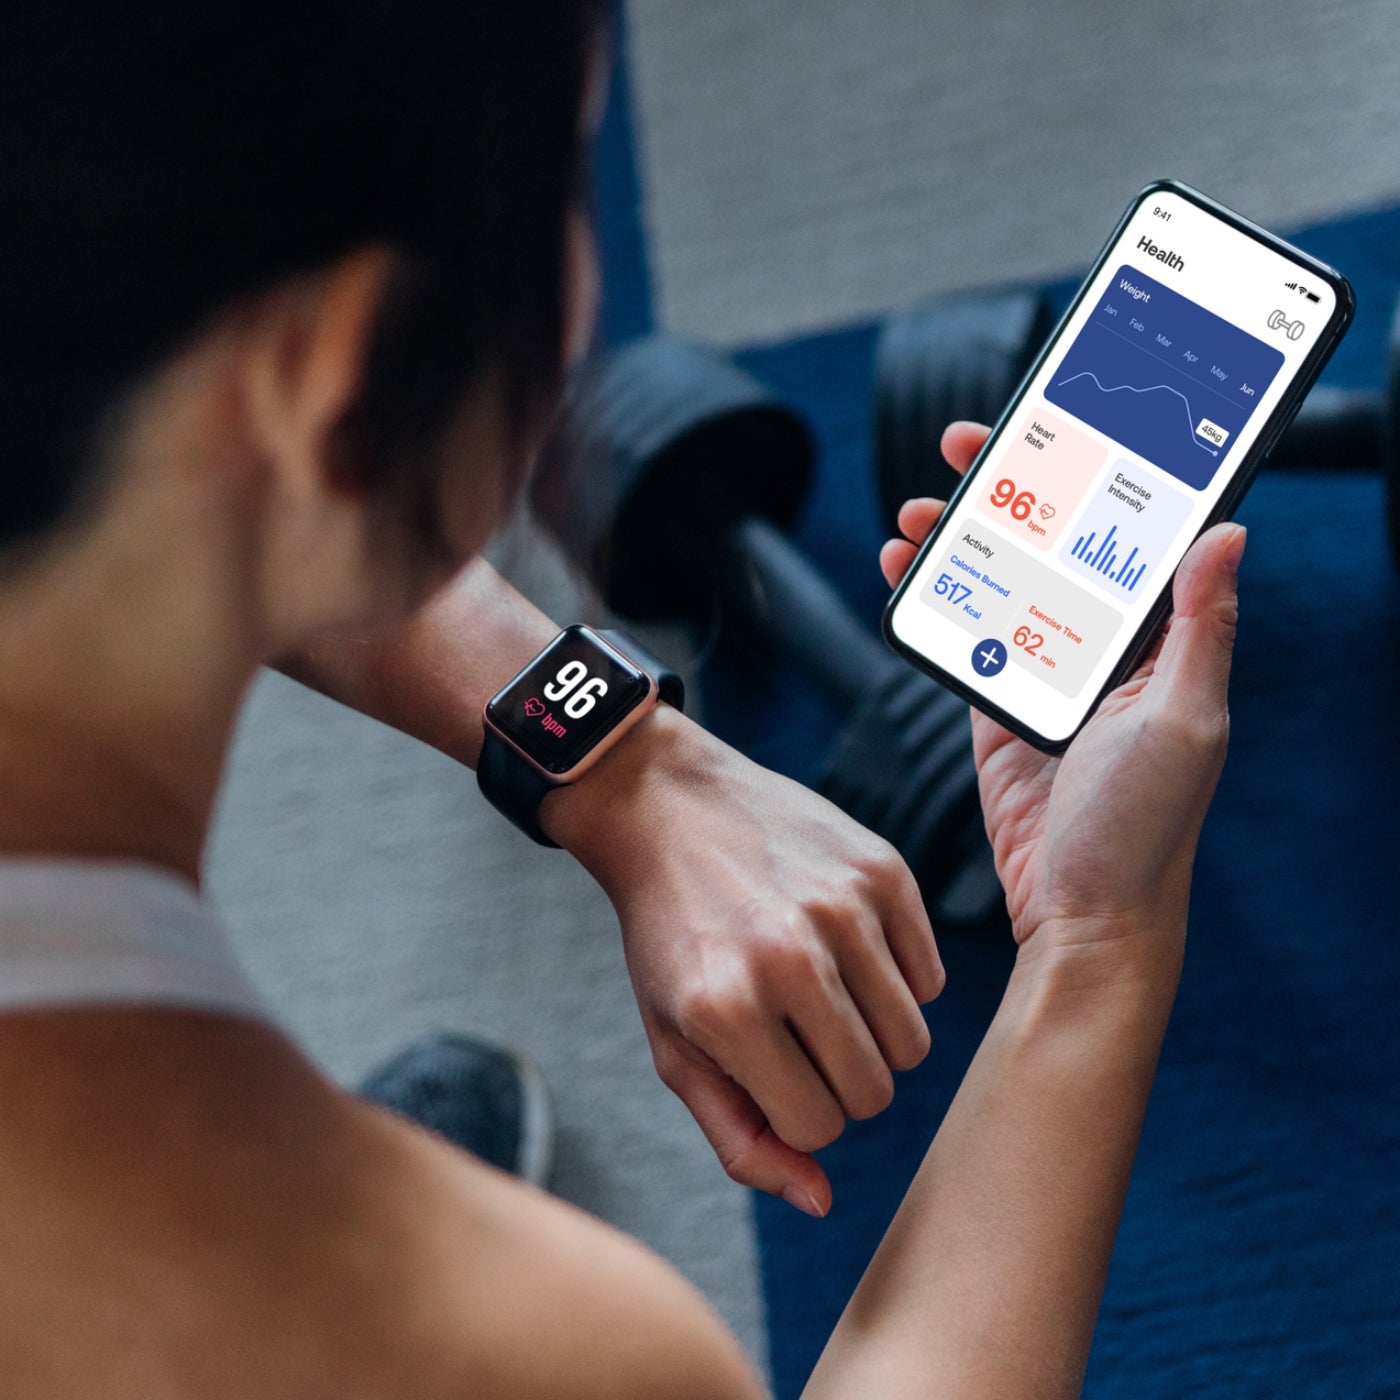 Fitness bands vs smart watches: Which is the right fit for you - Times of  India